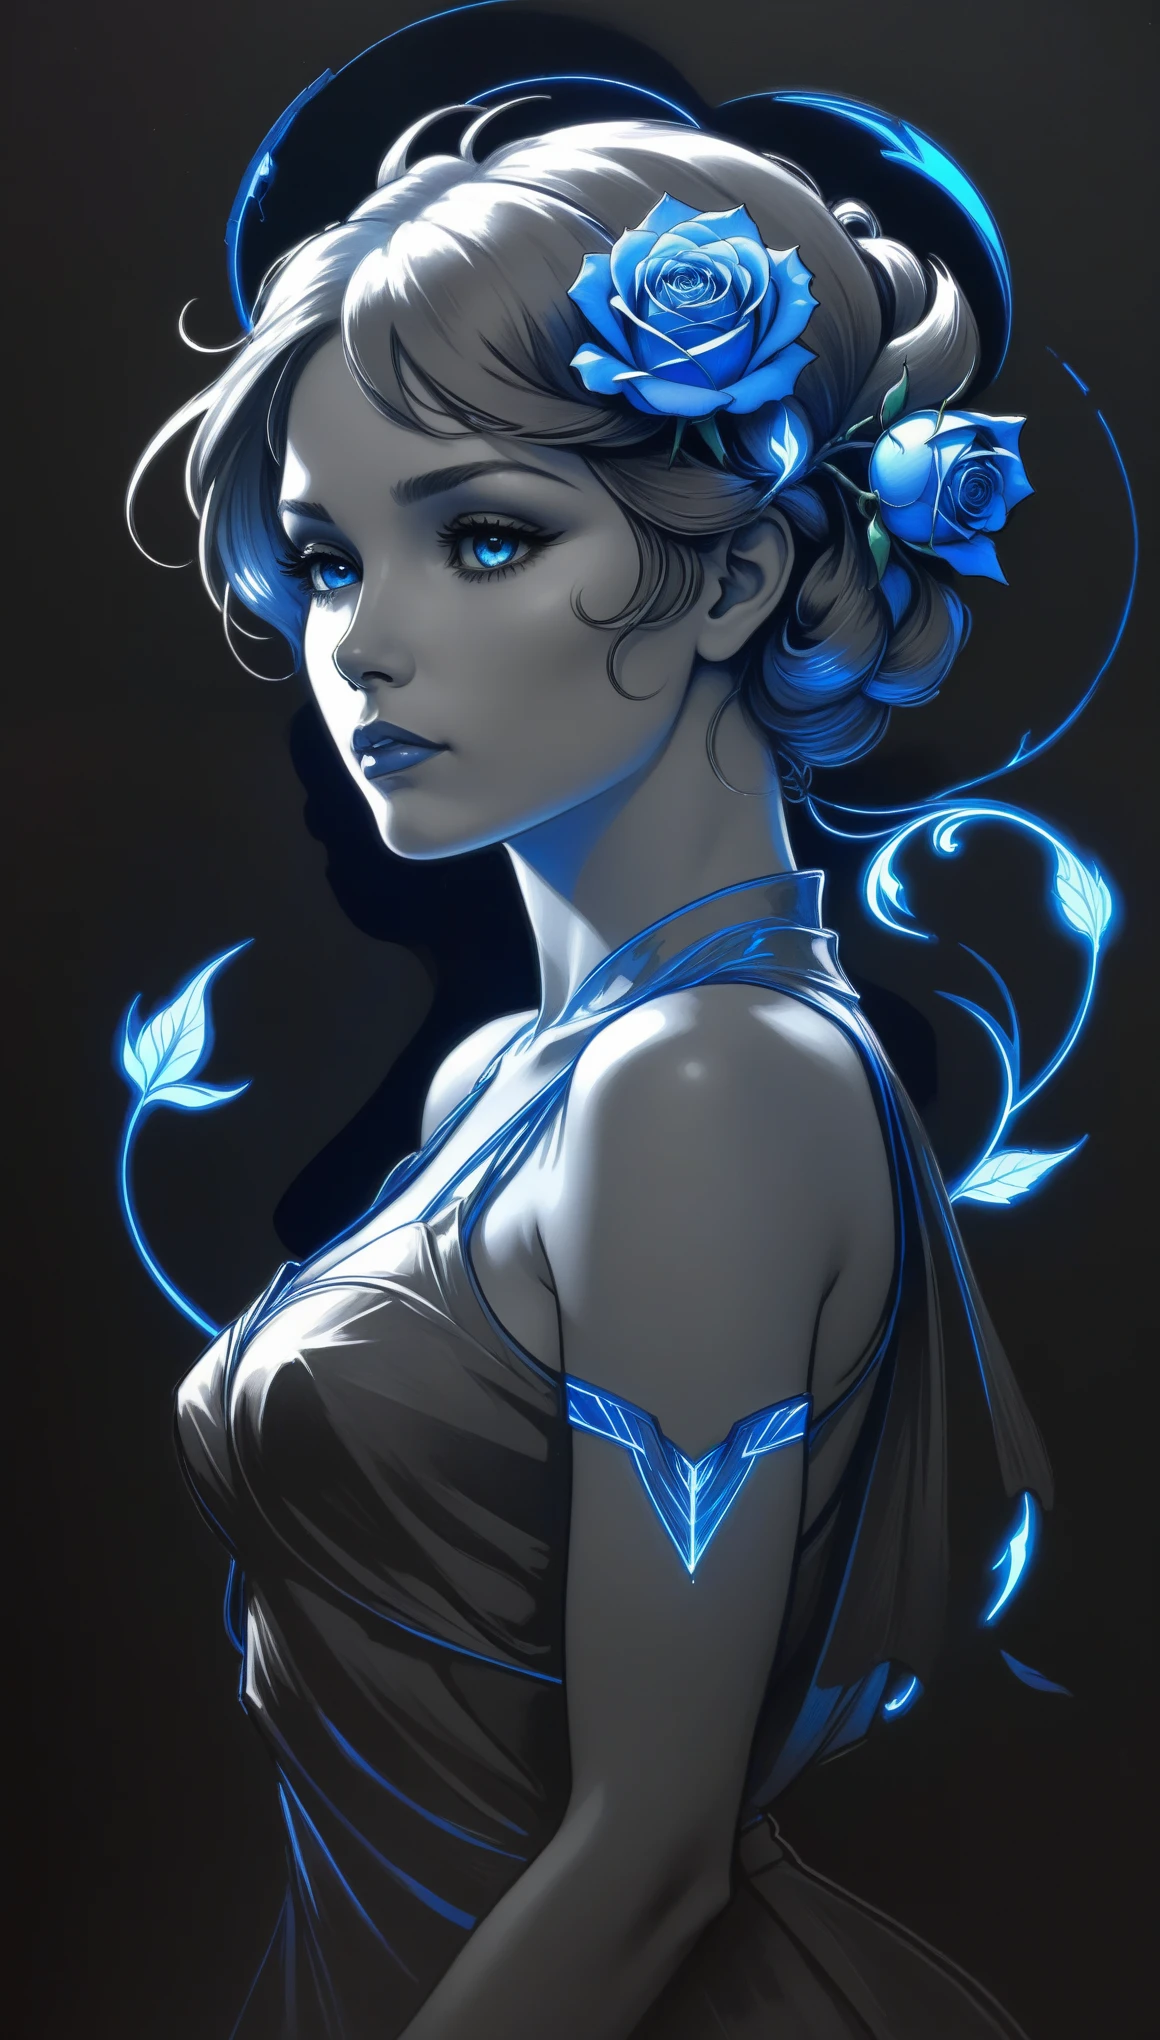 (Pencil_Sketch:1.2, messy lines, greyscale, traditional media, sketch),[[[artist by mucha]]]，On a dark background, blue electric charges form a stylized silhouette of a electric girl knihgt and rose , bioluminescence